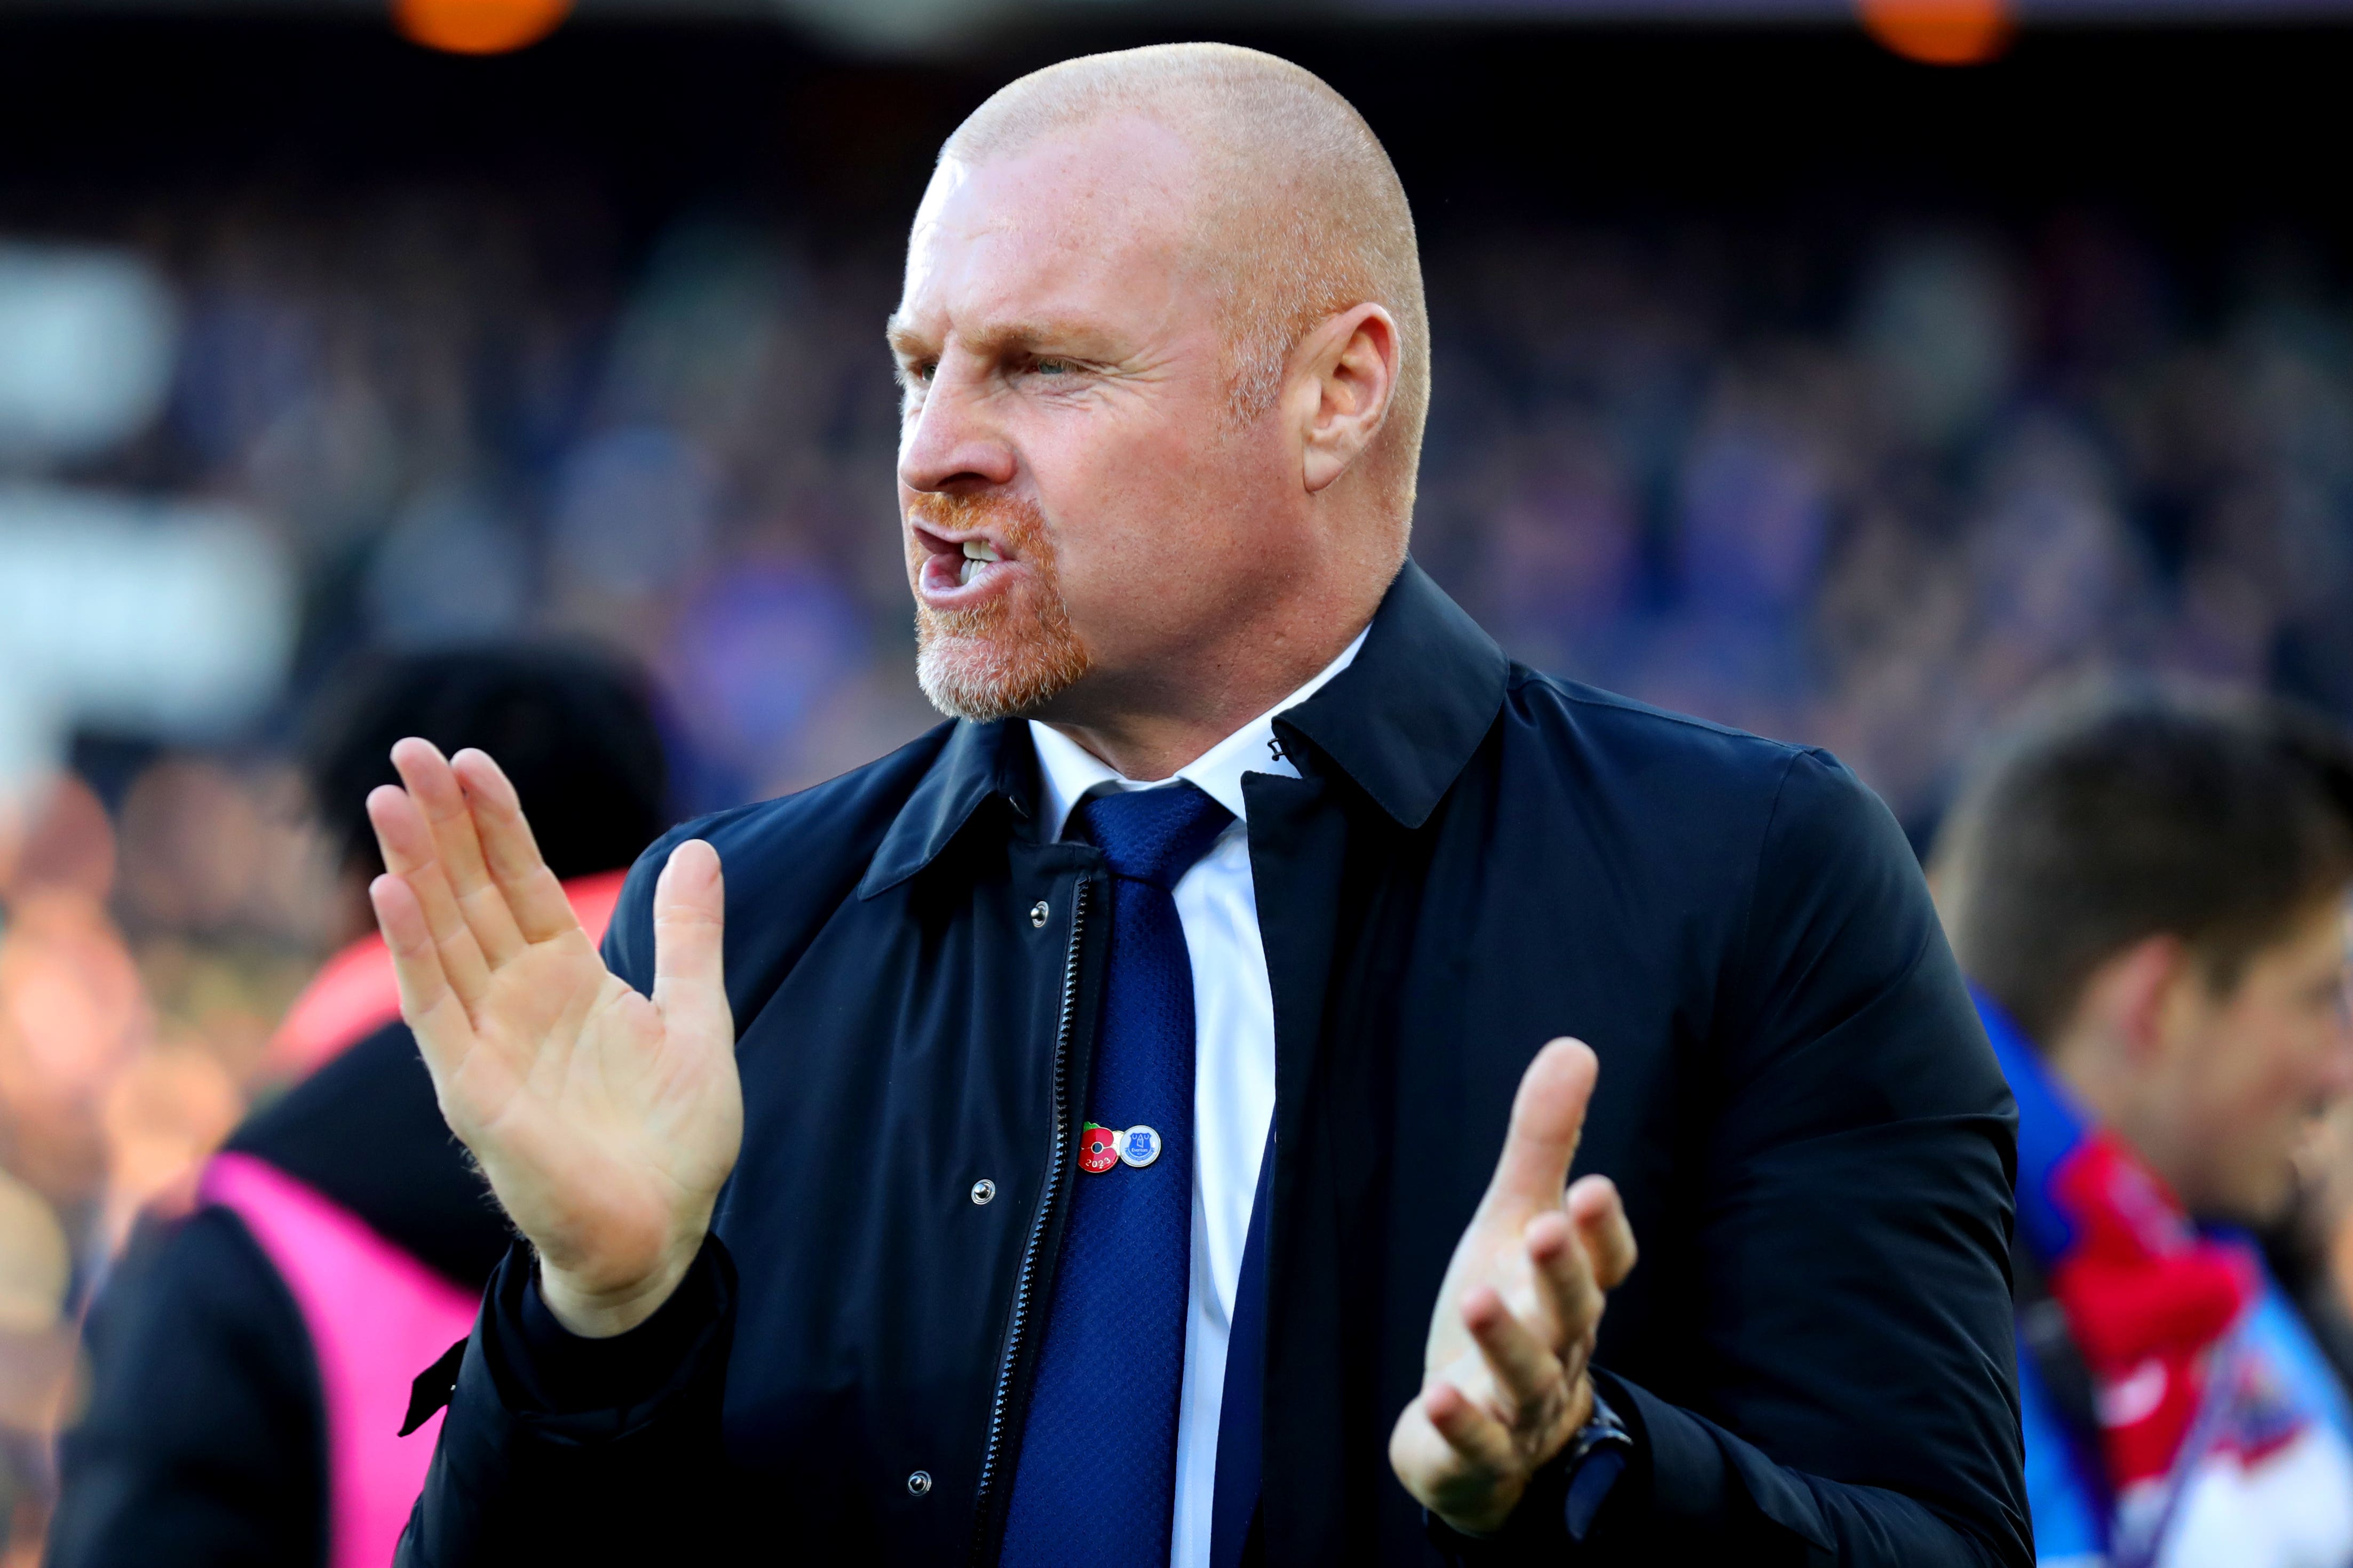 Sean Dyche said Everton’s mentality away from home is improving (Ben Whitely/PA)